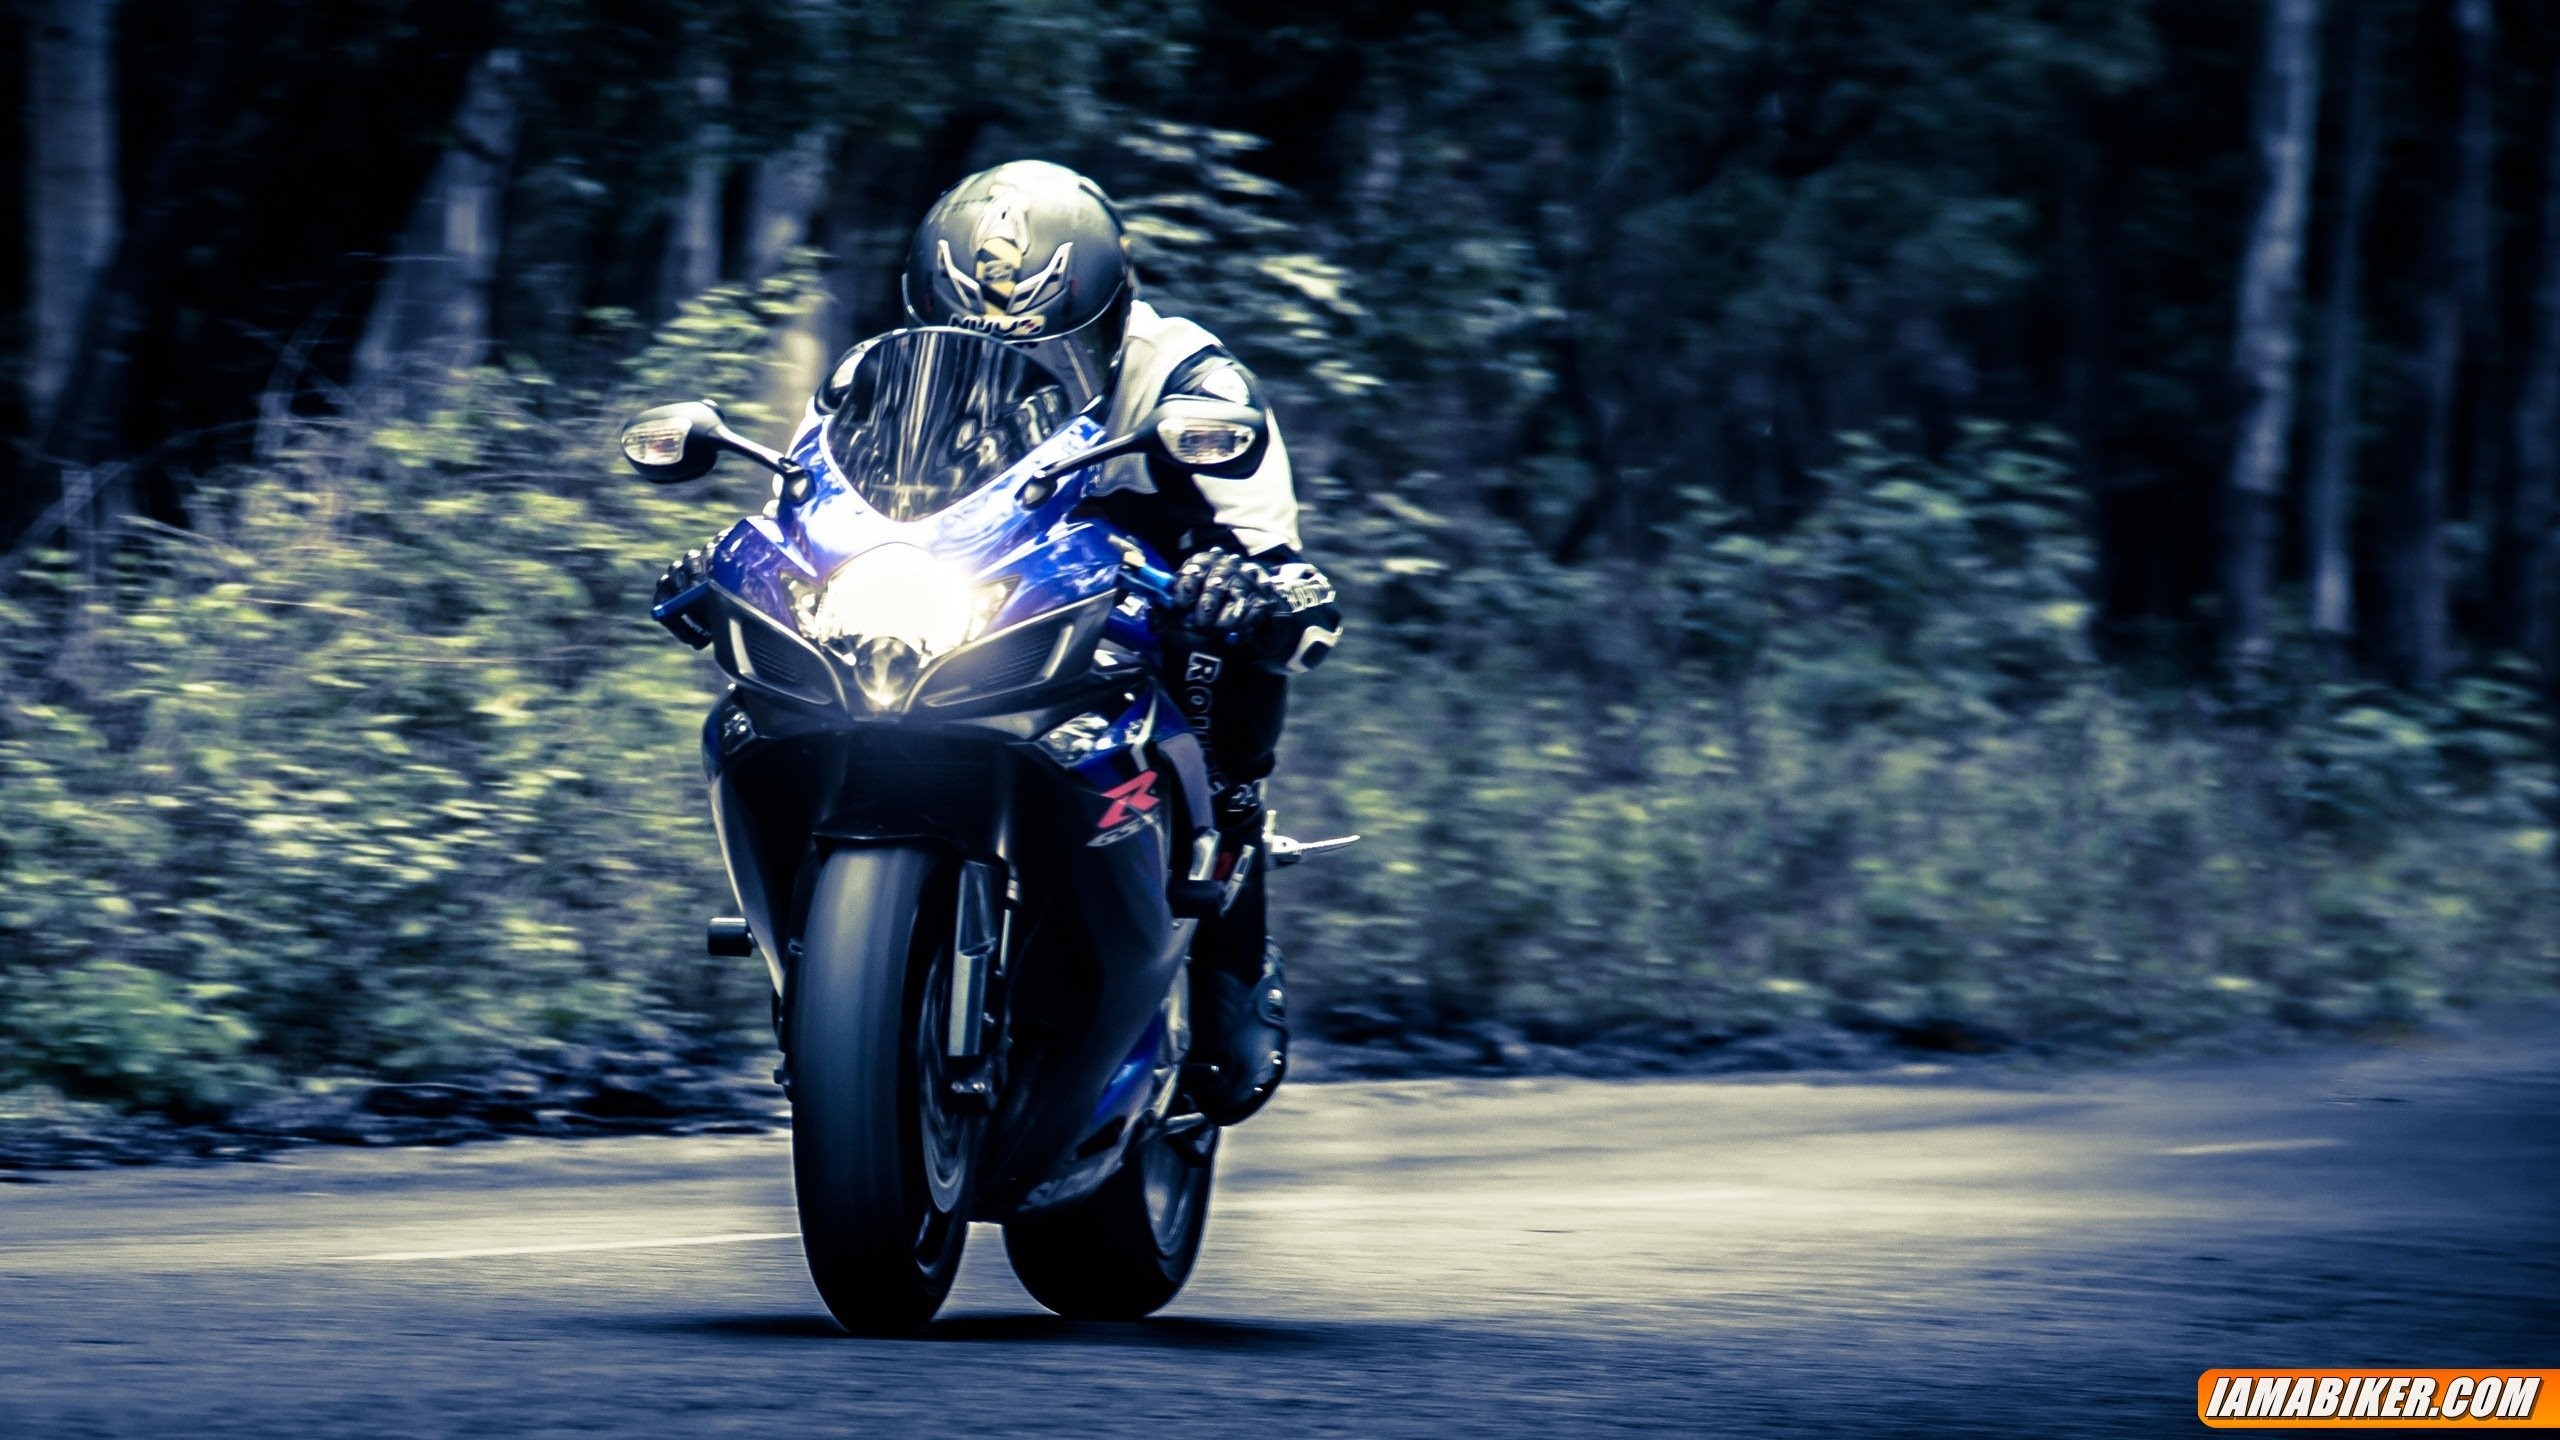 2560x1440 Below we have for you wallpapers of the Suzuki GSX-R 1000 and the GSX-R  600. Click on the image for its higher resolution version.